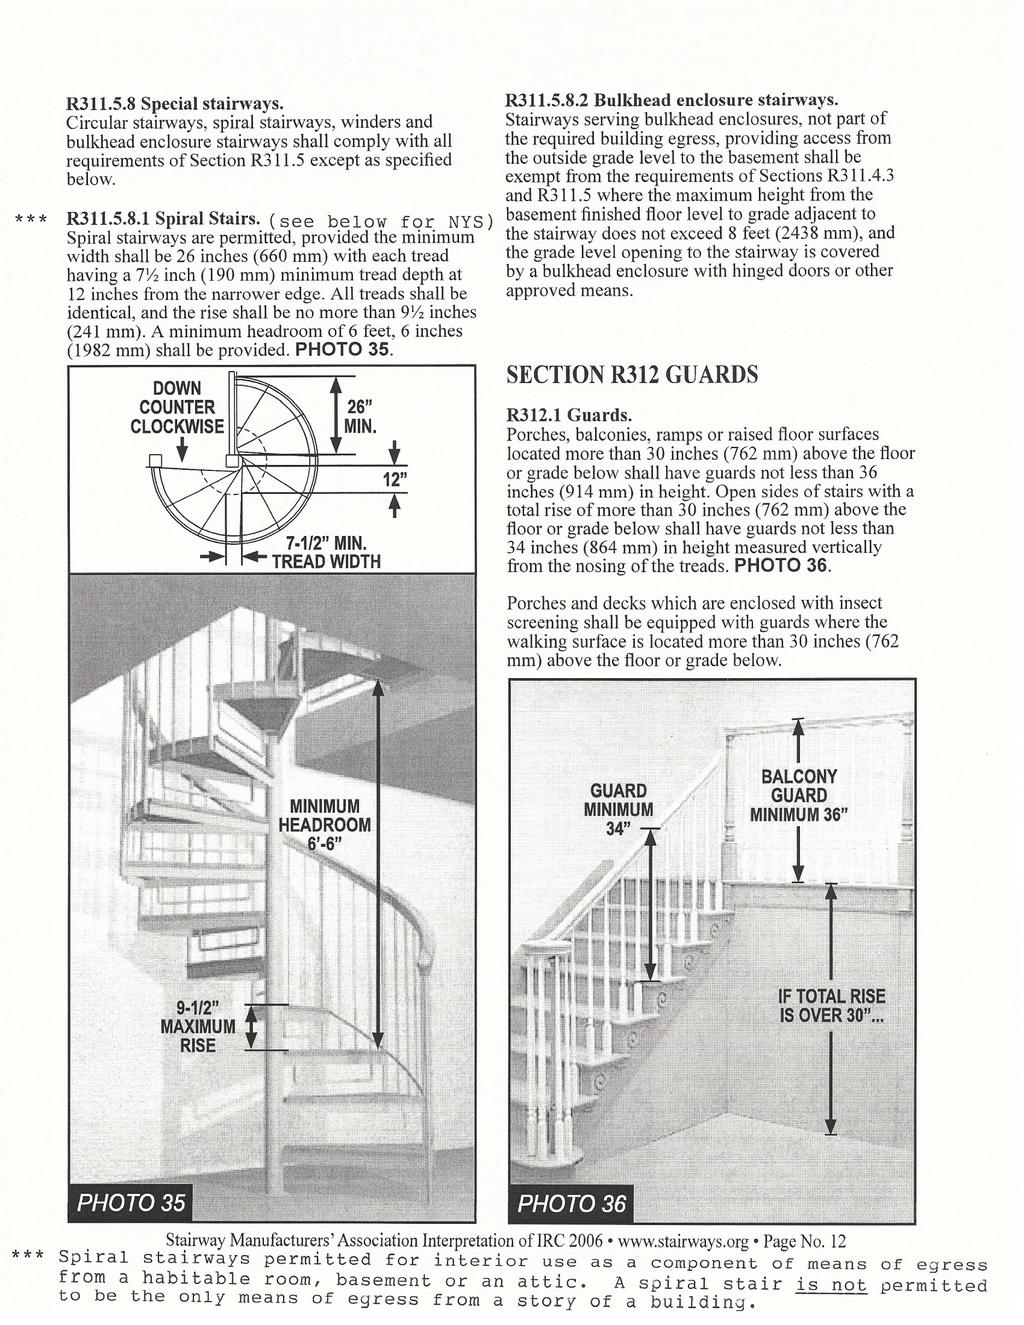 R311.5.8 Special stairways. Circular stairways, spiral stairways, winders and bulkhead enclosure stairways shall comply with all requirements of Section R3ll.5 except as specified below. *** R311.5.8.1 Spiral Stairs.